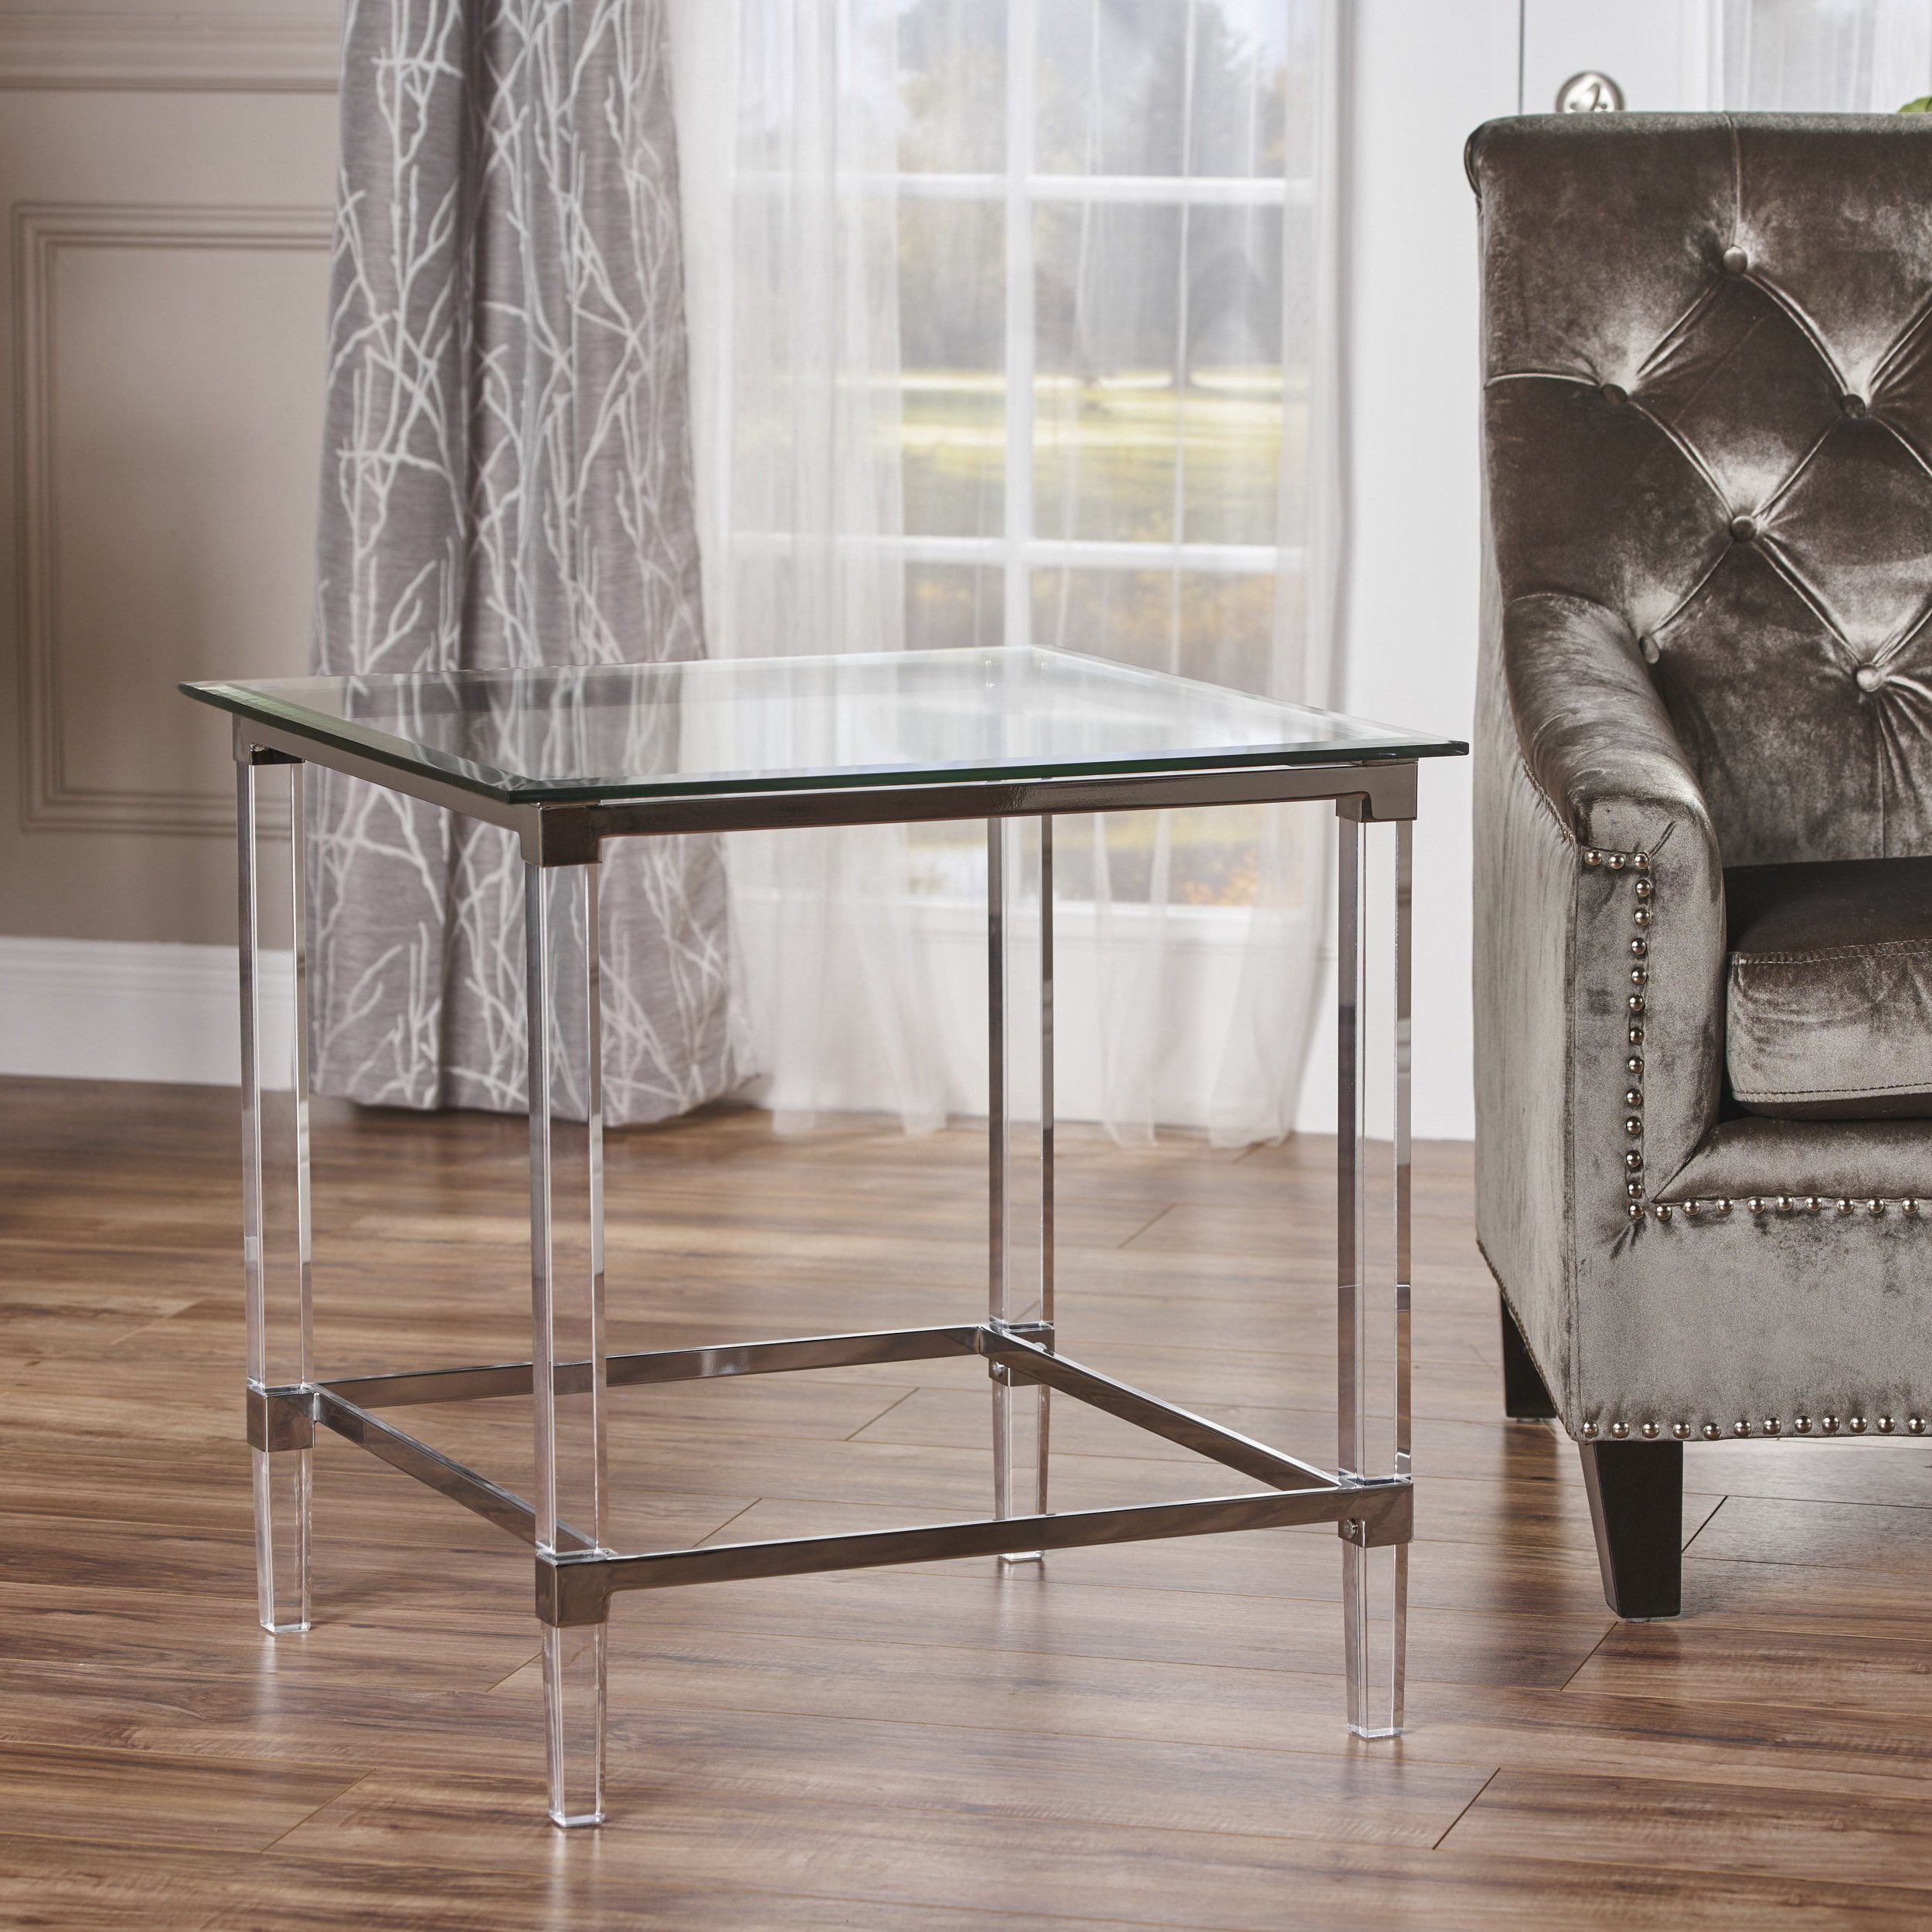 Great Deal Furniture 302234 Orson Acrylic And Tempered Pertaining To Famous Gold And Clear Acrylic Side Tables (View 3 of 20)